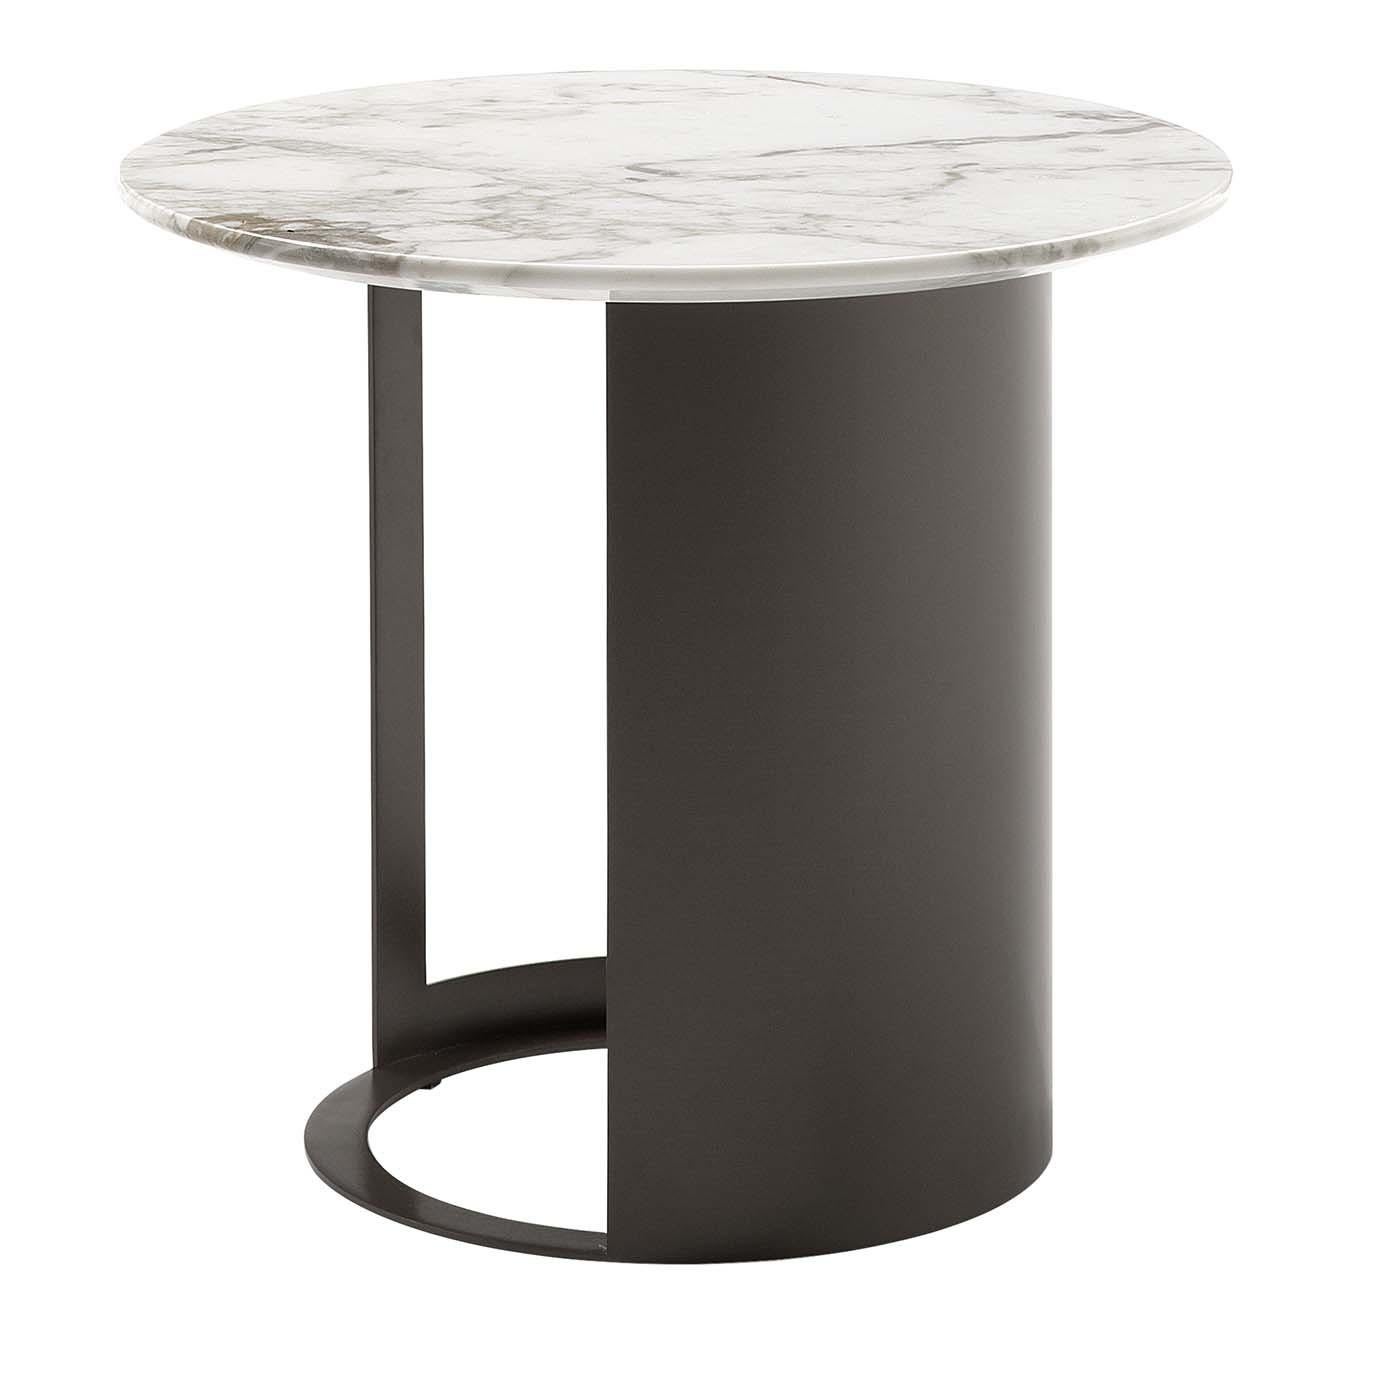 This side table is part of the Ci collection, featuring a contemporary silhouette and the combination of a luxurious top in Gold Calacatta marble and a bottom in metal. The open structure of the base creates a striking interplay of full and empty